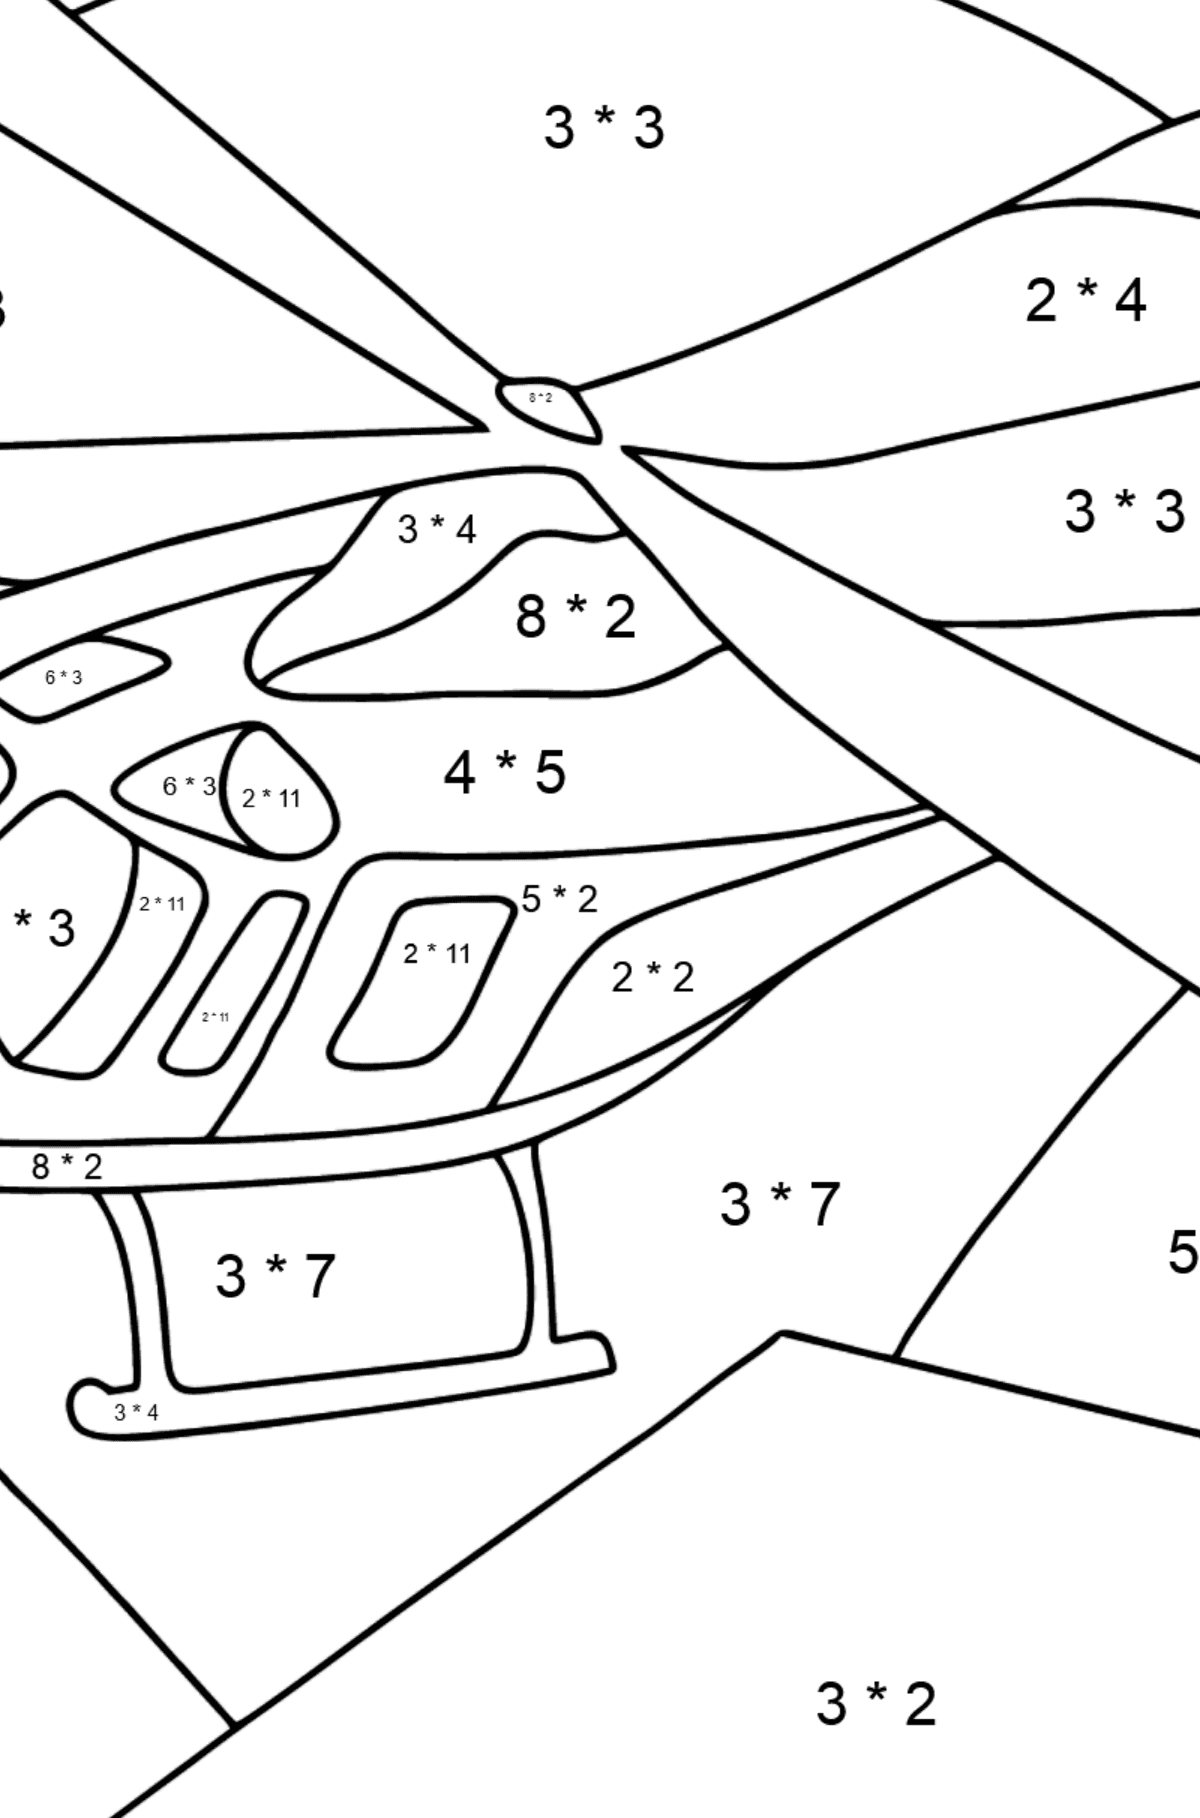 Coloring Page - A Sport Helicopter - Math Coloring - Multiplication for Kids